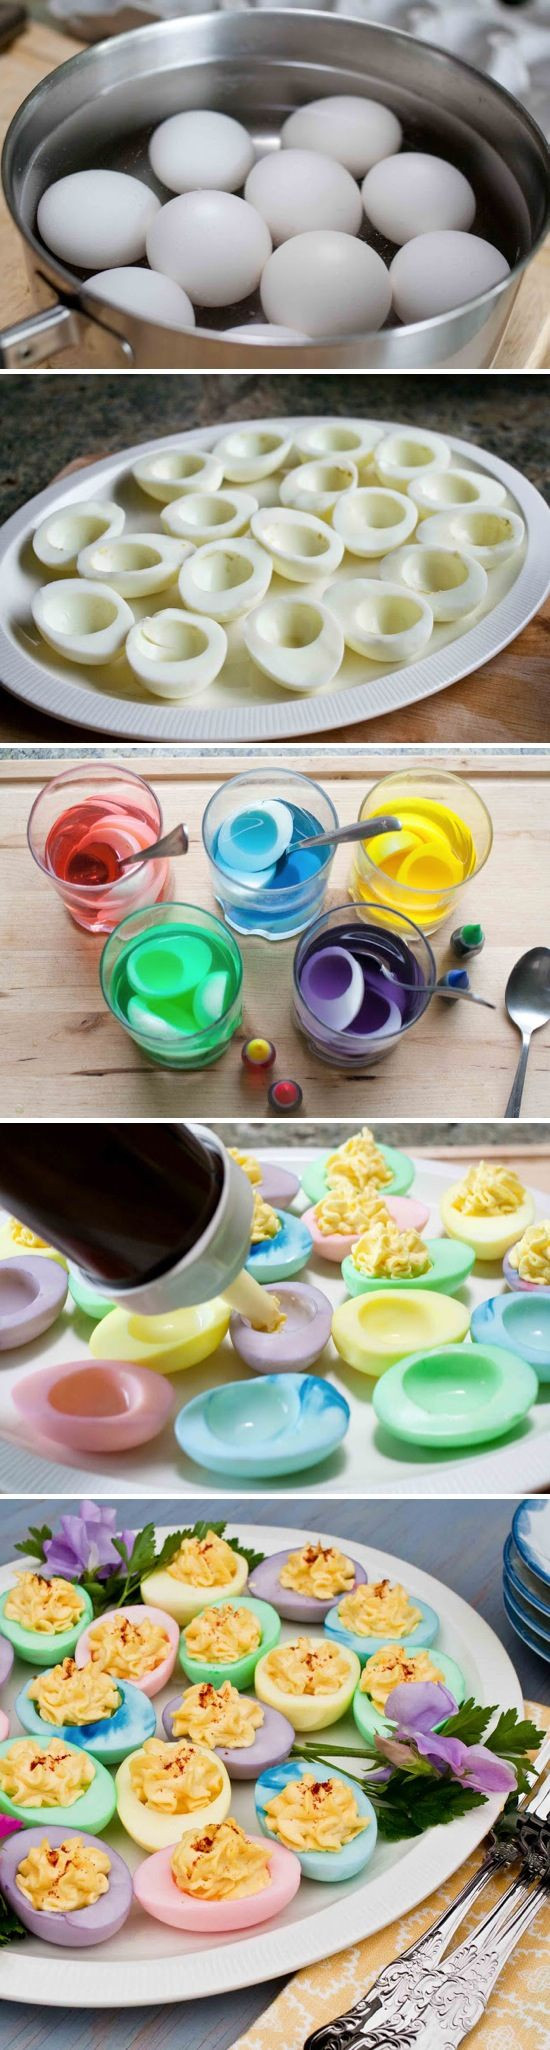 Colored Deviled Eggs For Easter
 Colorful Deviled Eggs